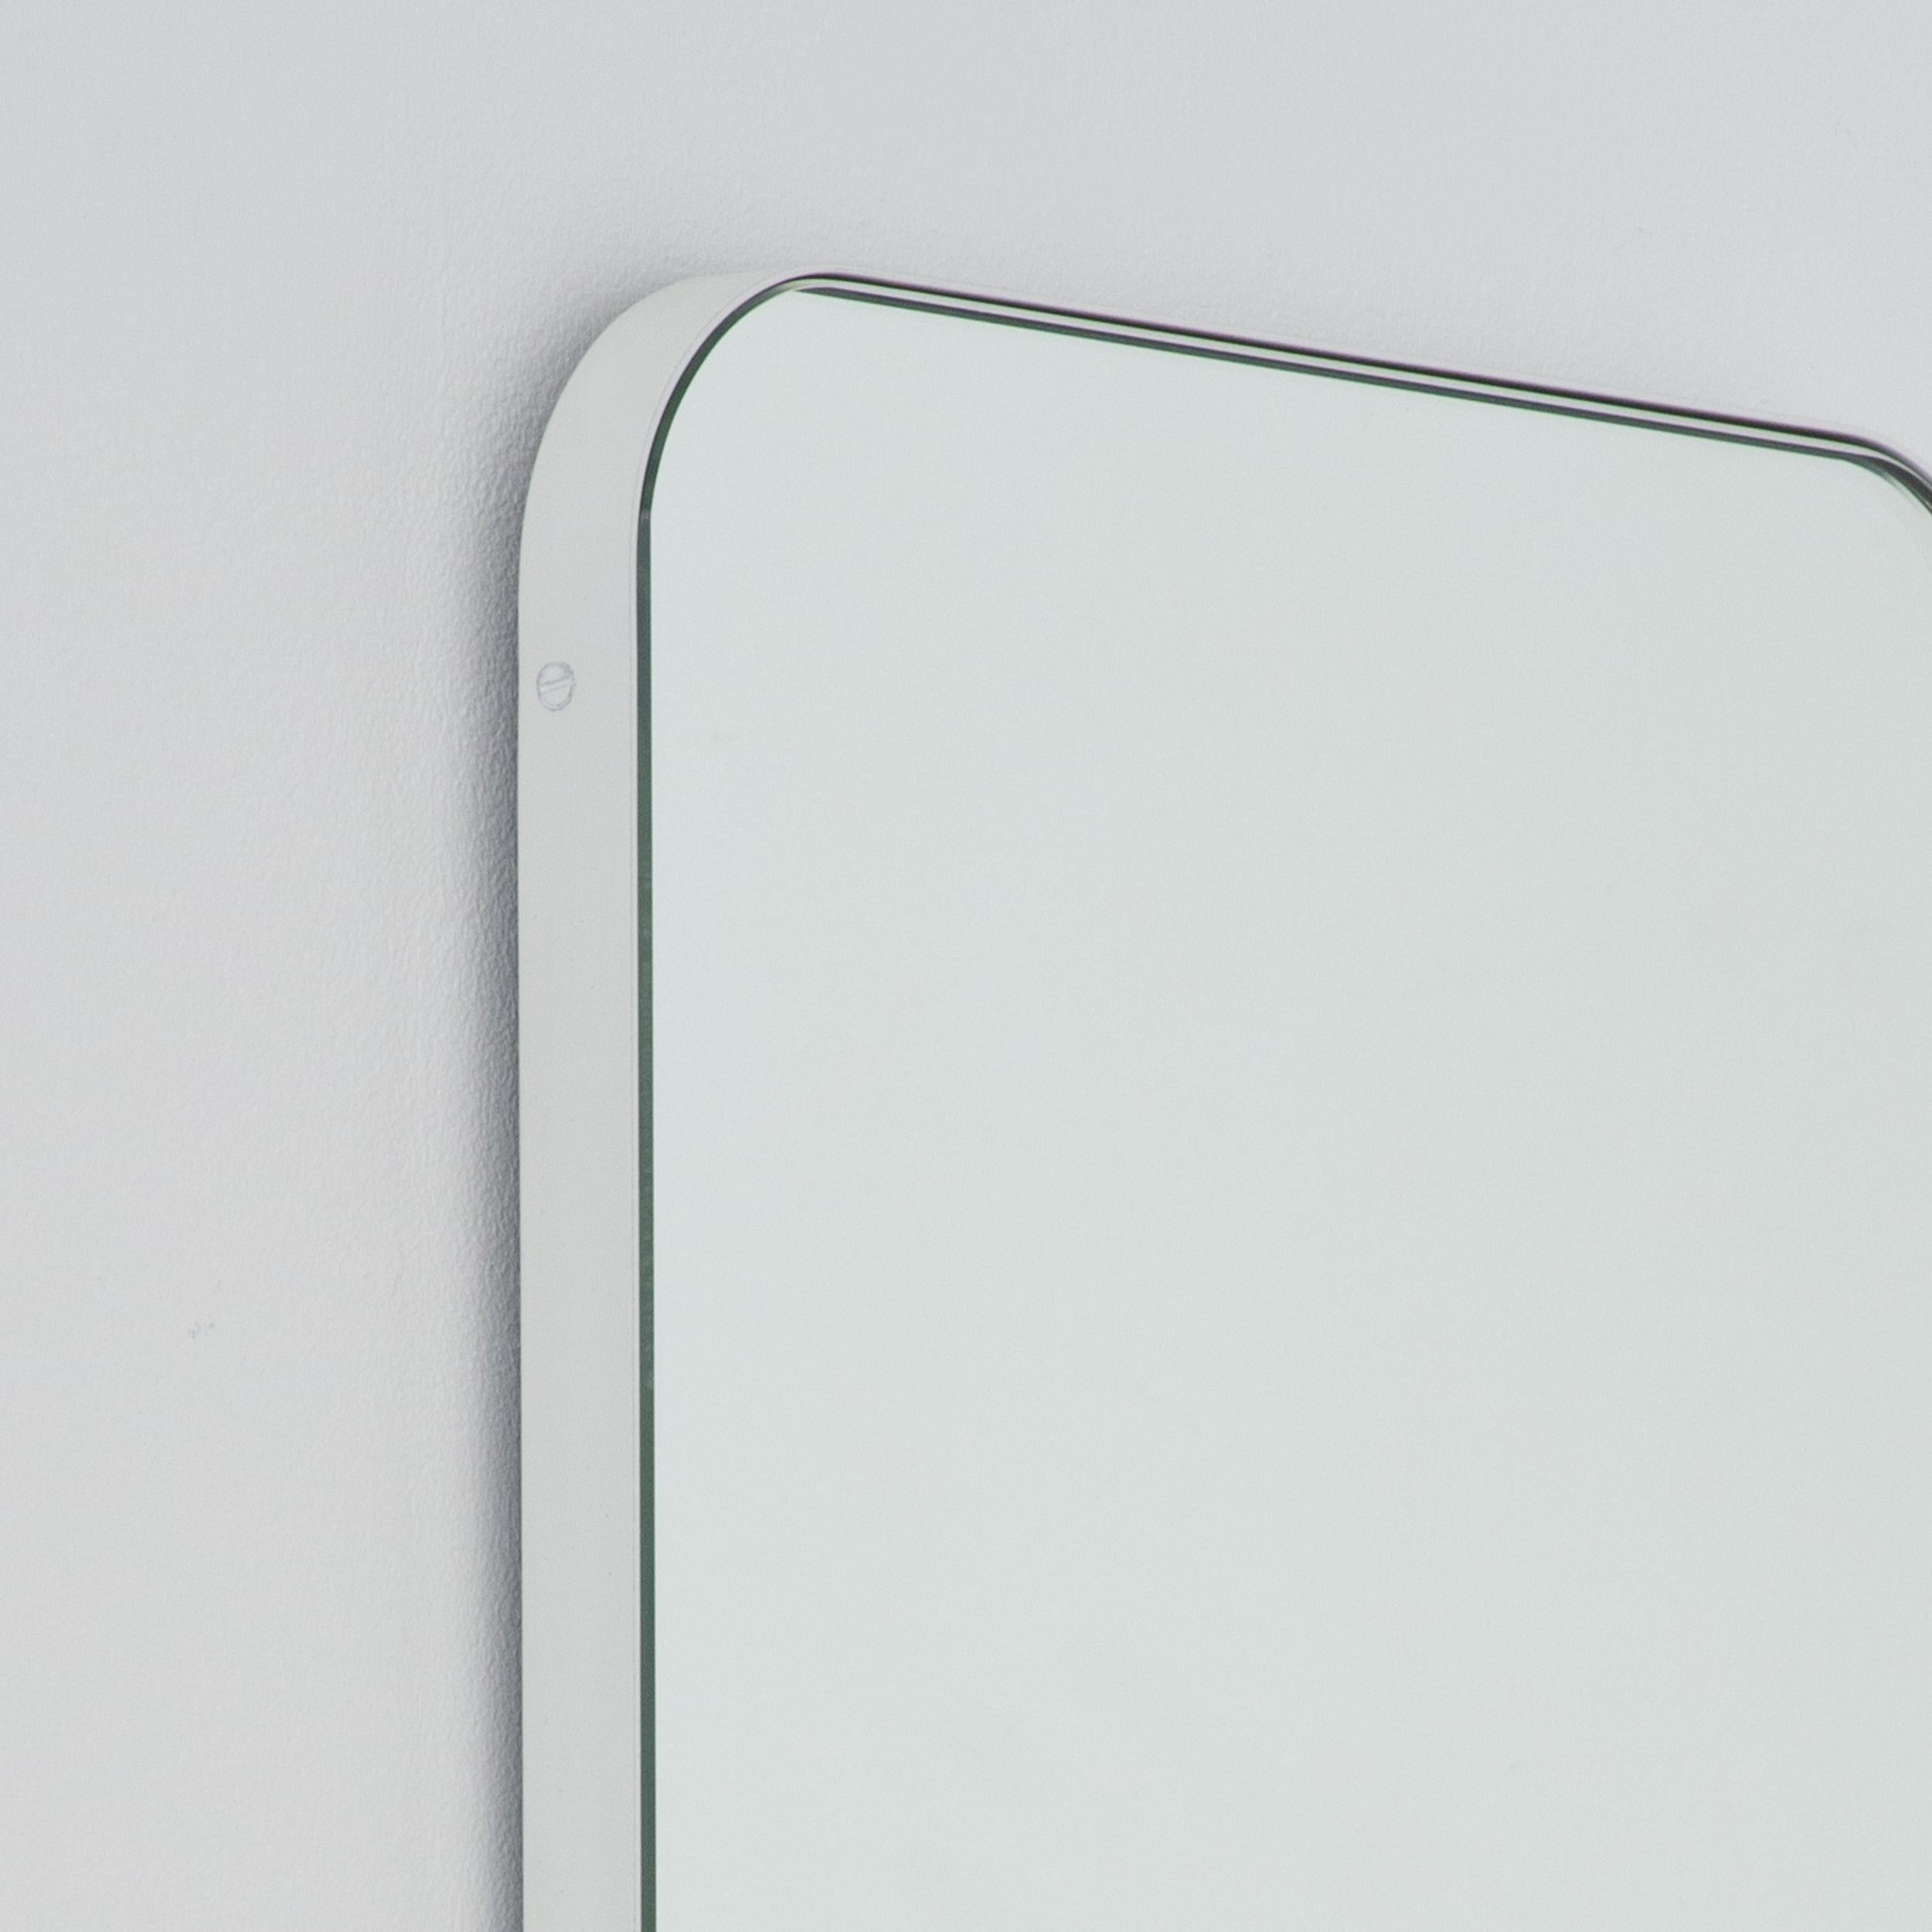 Powder-Coated Quadris Rectangular Modern Mirror with a White Frame, Small For Sale